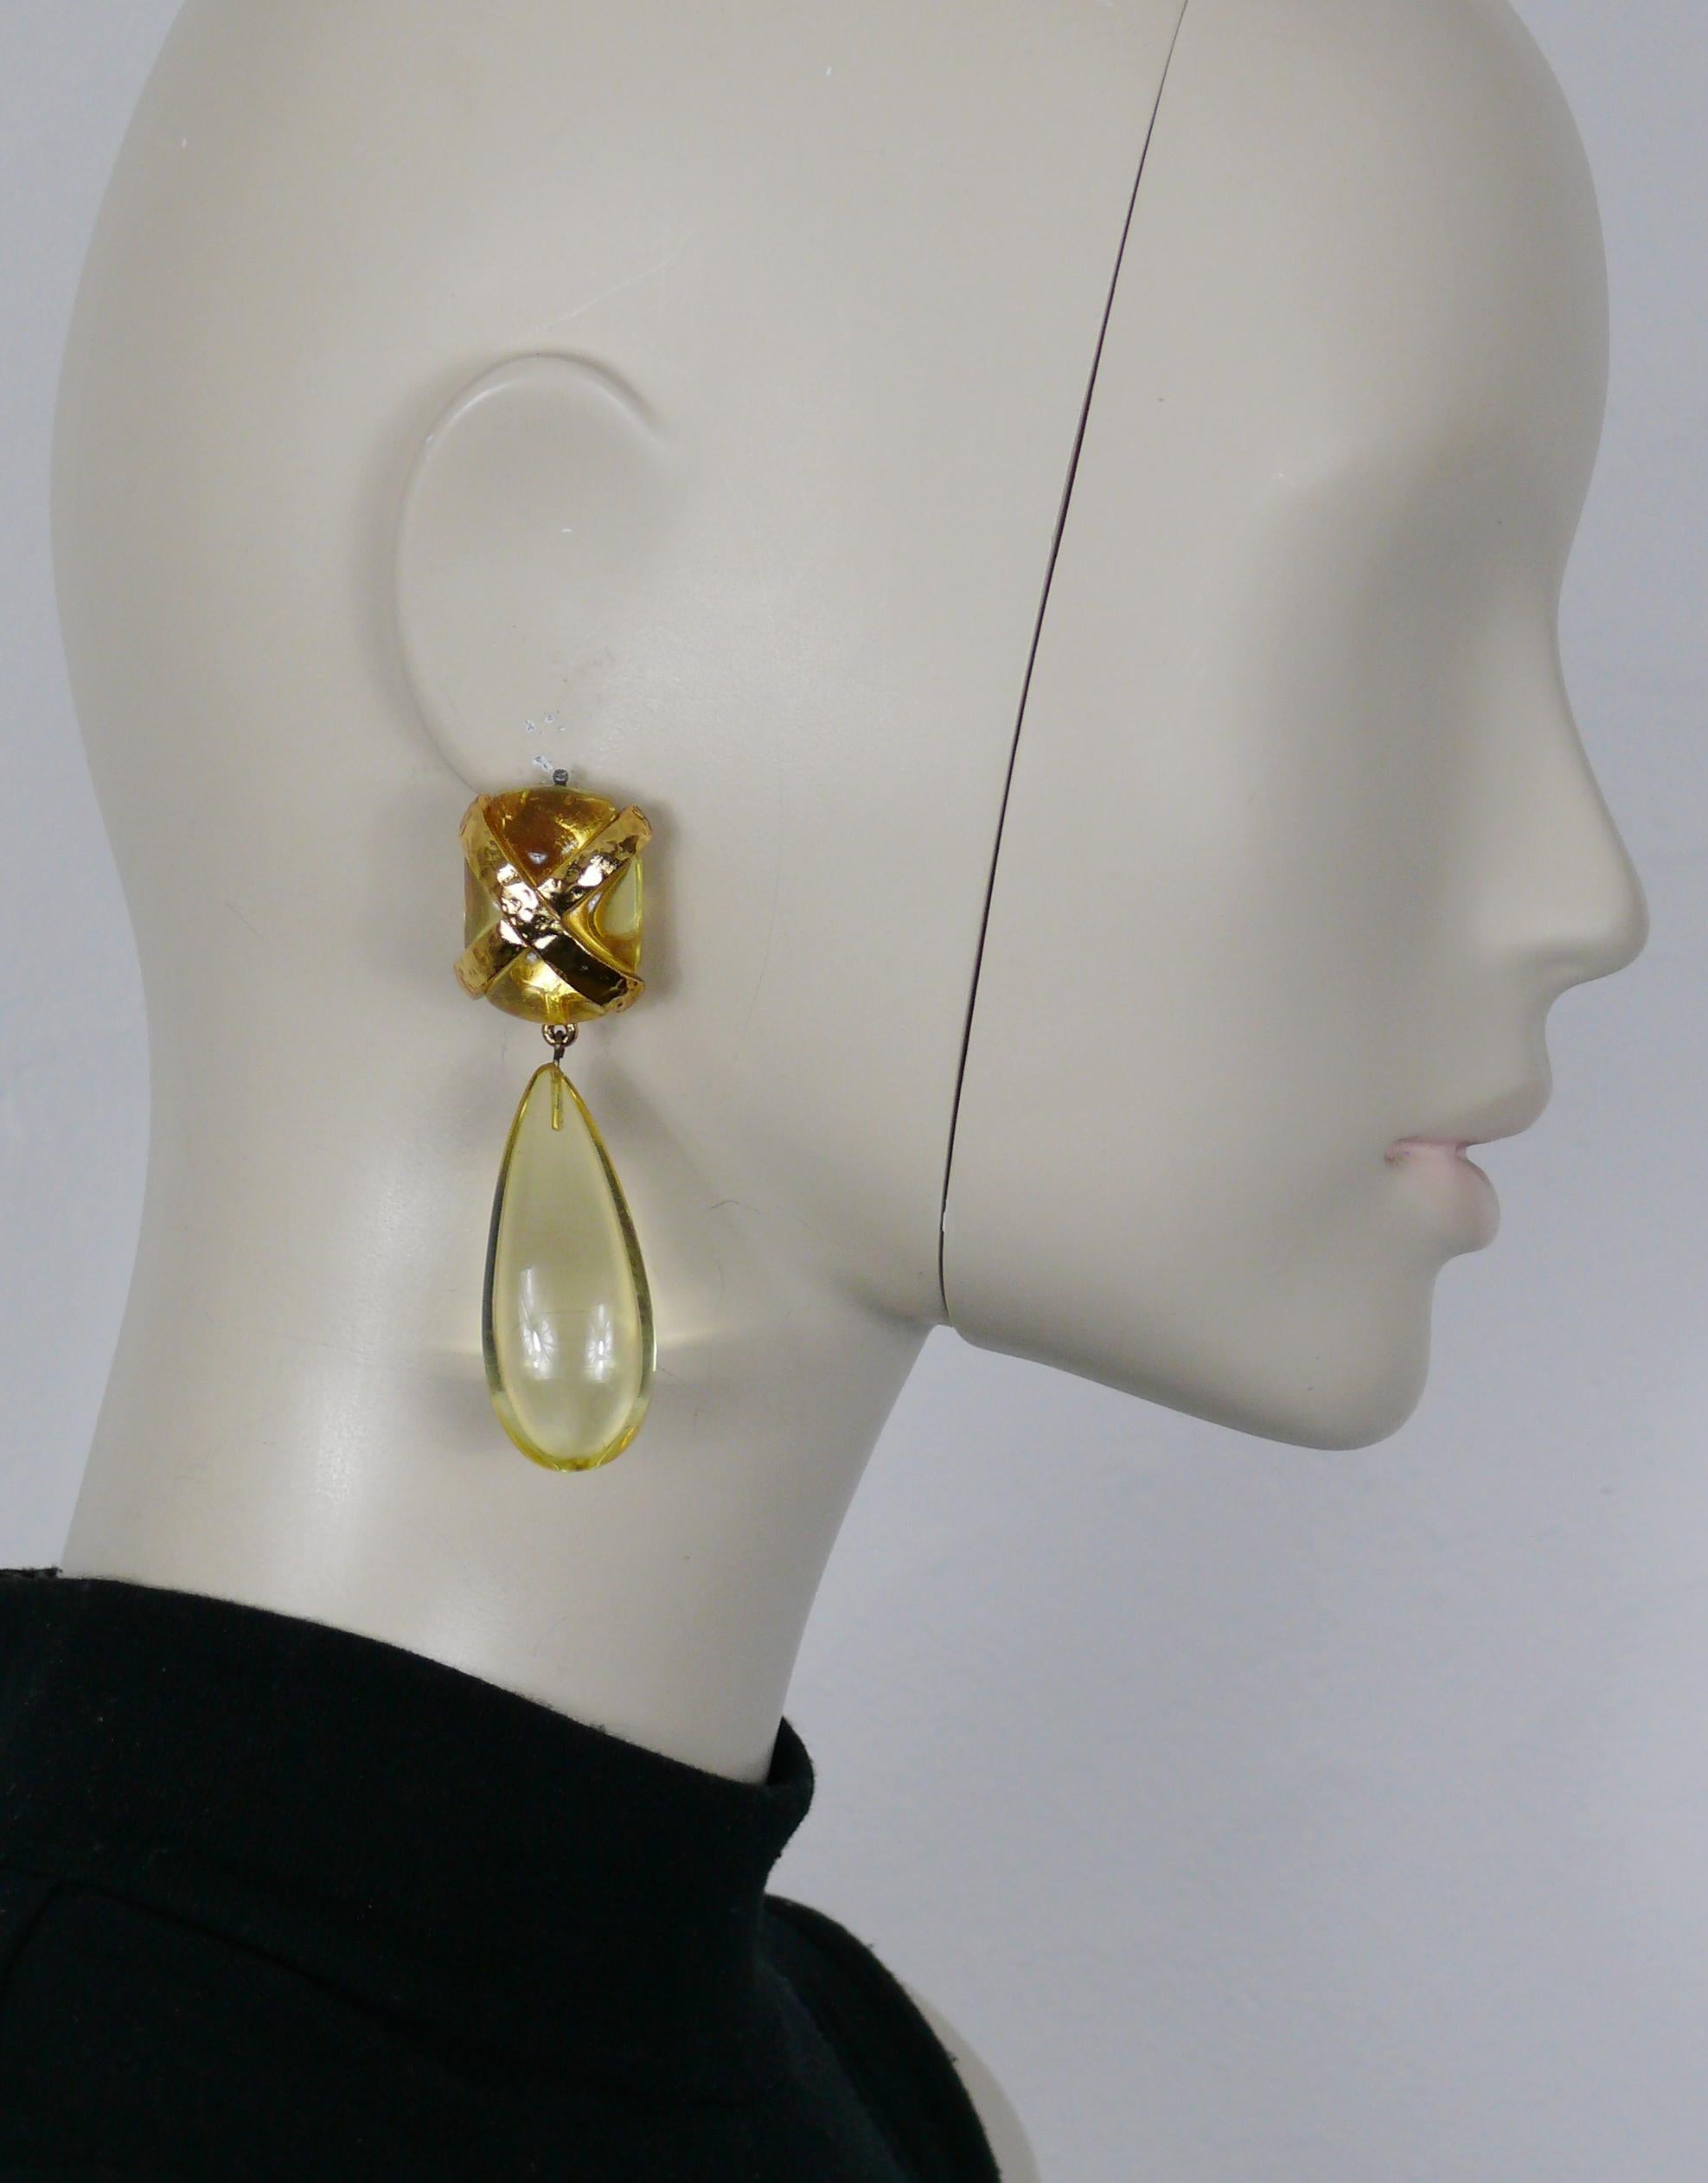 SONIA RYKIEL vintage yellow resin dangling earrings (clip-on) embellished with textured gold tone metal hardware.

Marked SONIA RYKEL Paris.

Indicative measurements : height approx. 7.8 cm (3.07 inches) / max. width approx. 2 cm (0.79